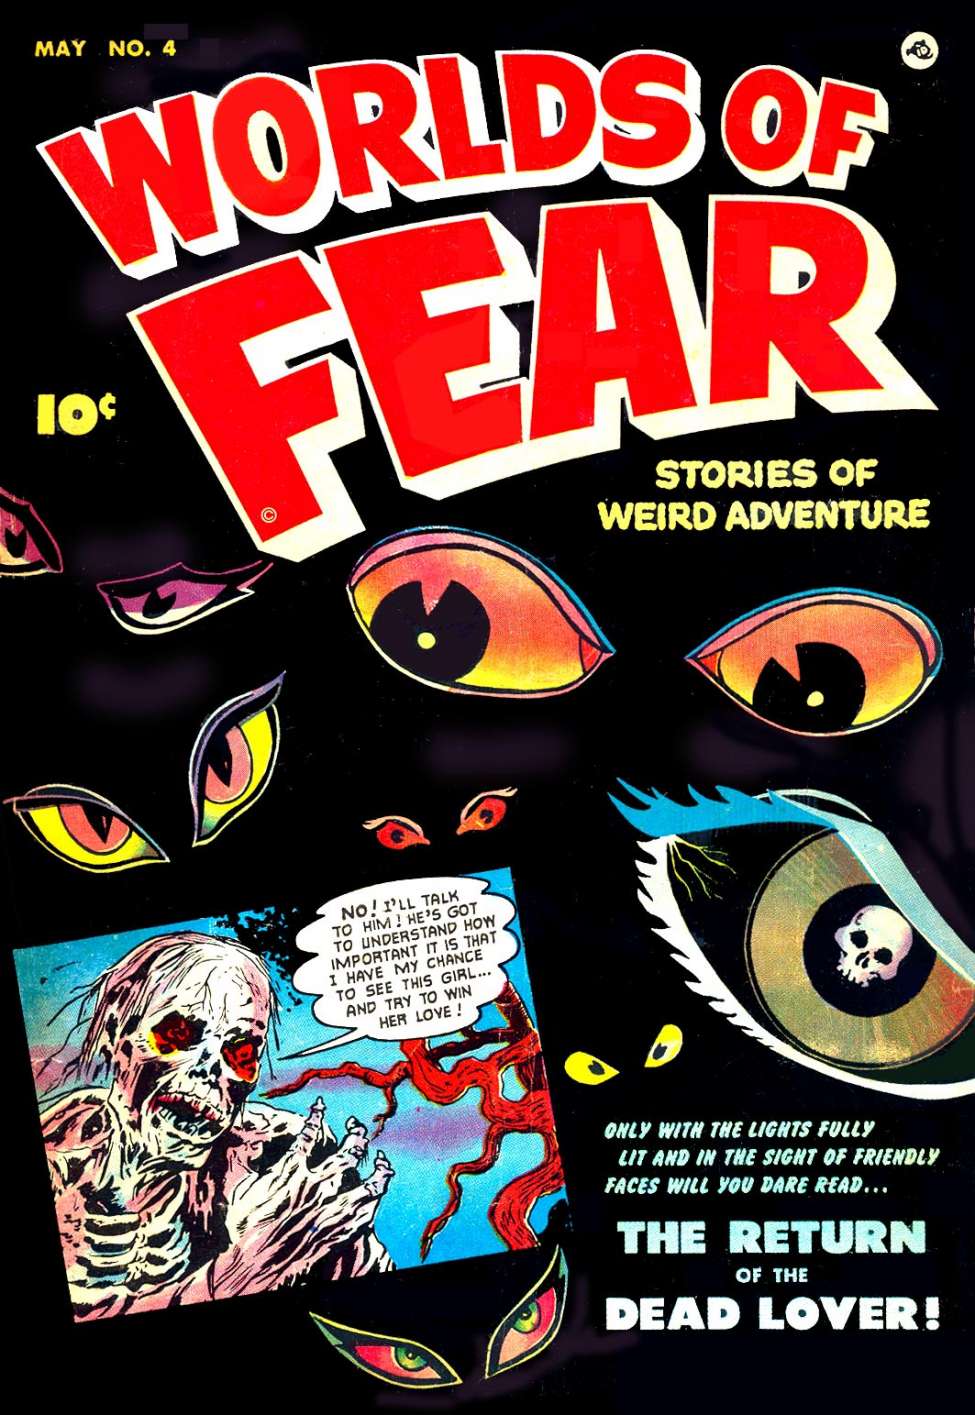 Comic Book Cover For Worlds of Fear 4